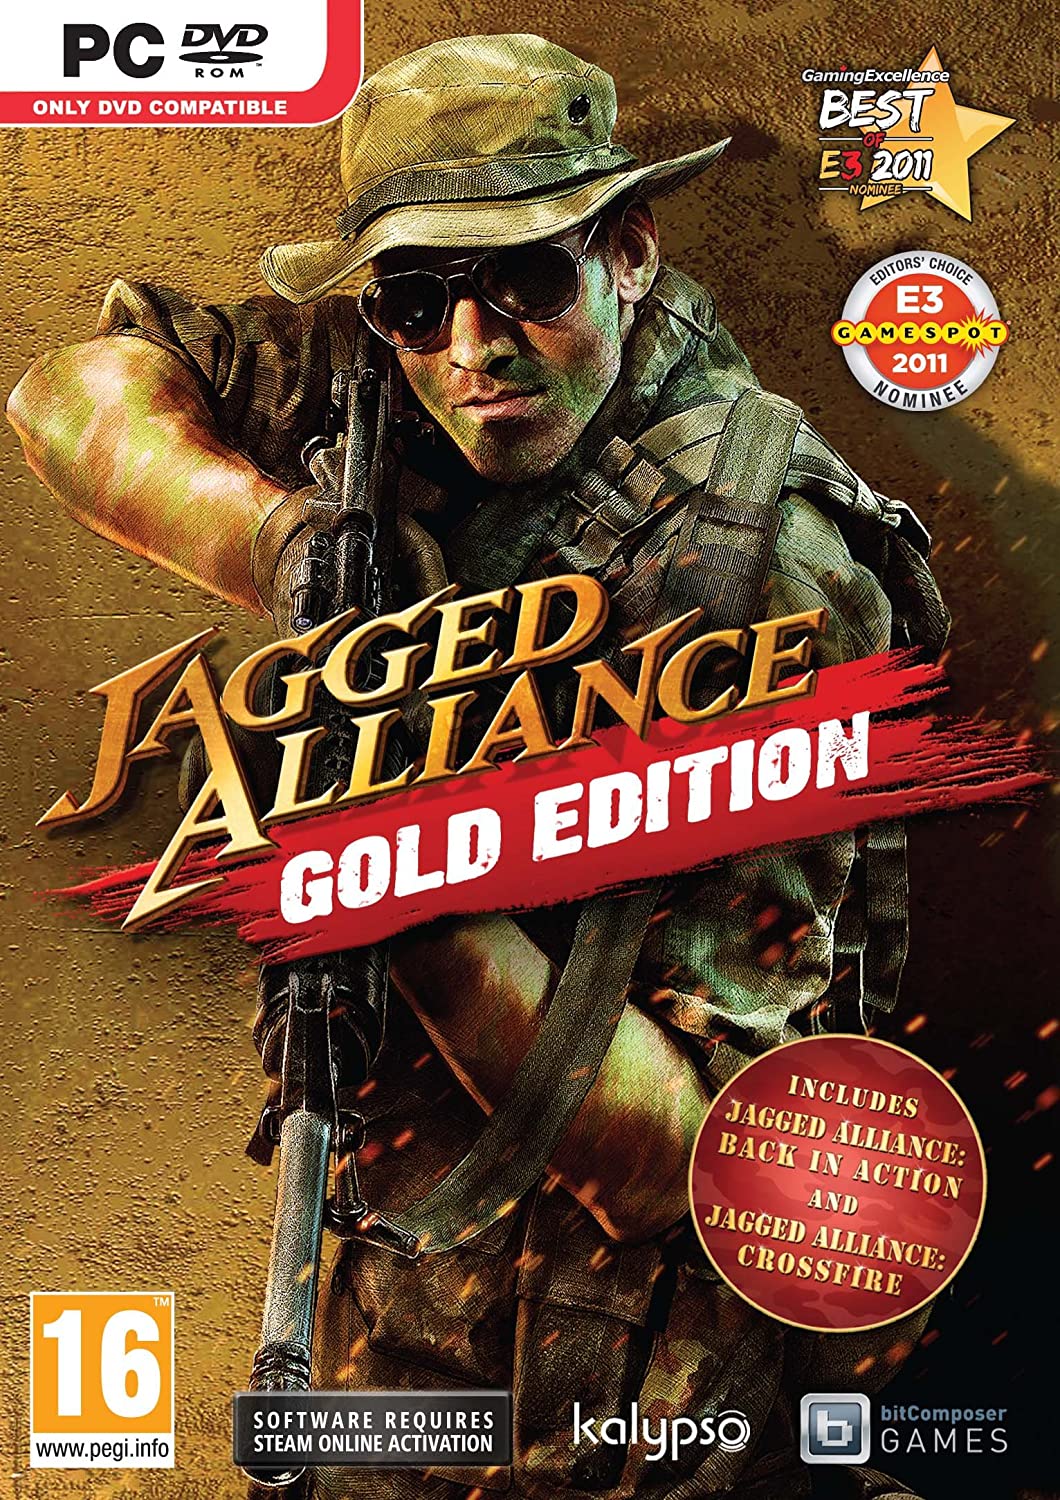 Jagged Alliance Gold Edition Game PC [PC]